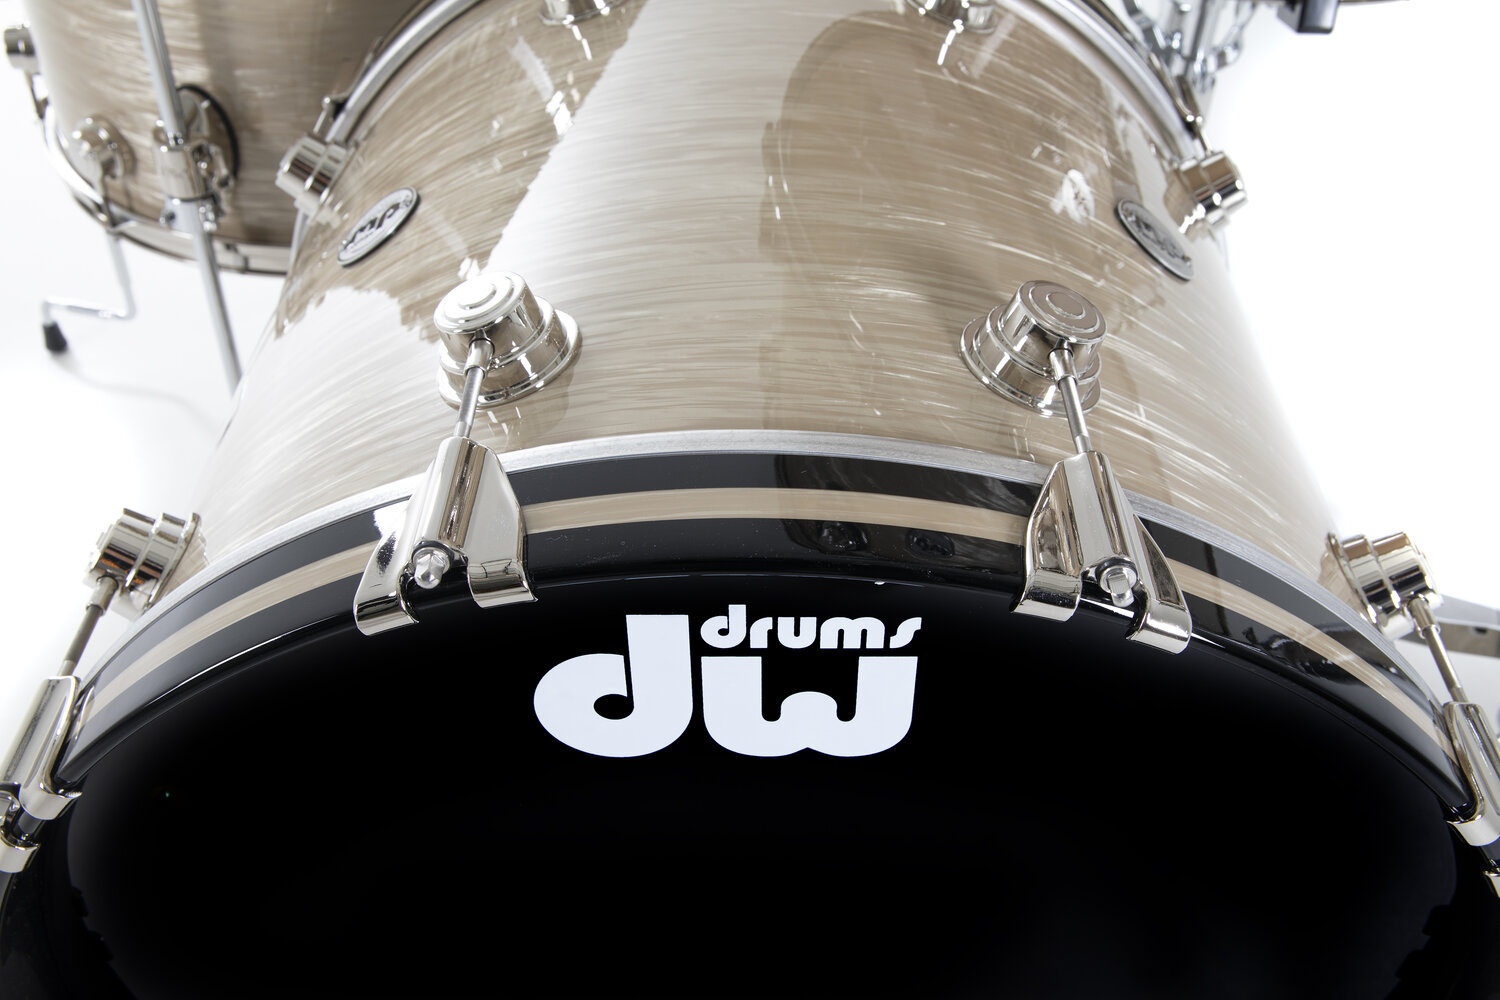 dw Collectors Finish Ply 22B/10T/12T/16F/14S Creme Oyster